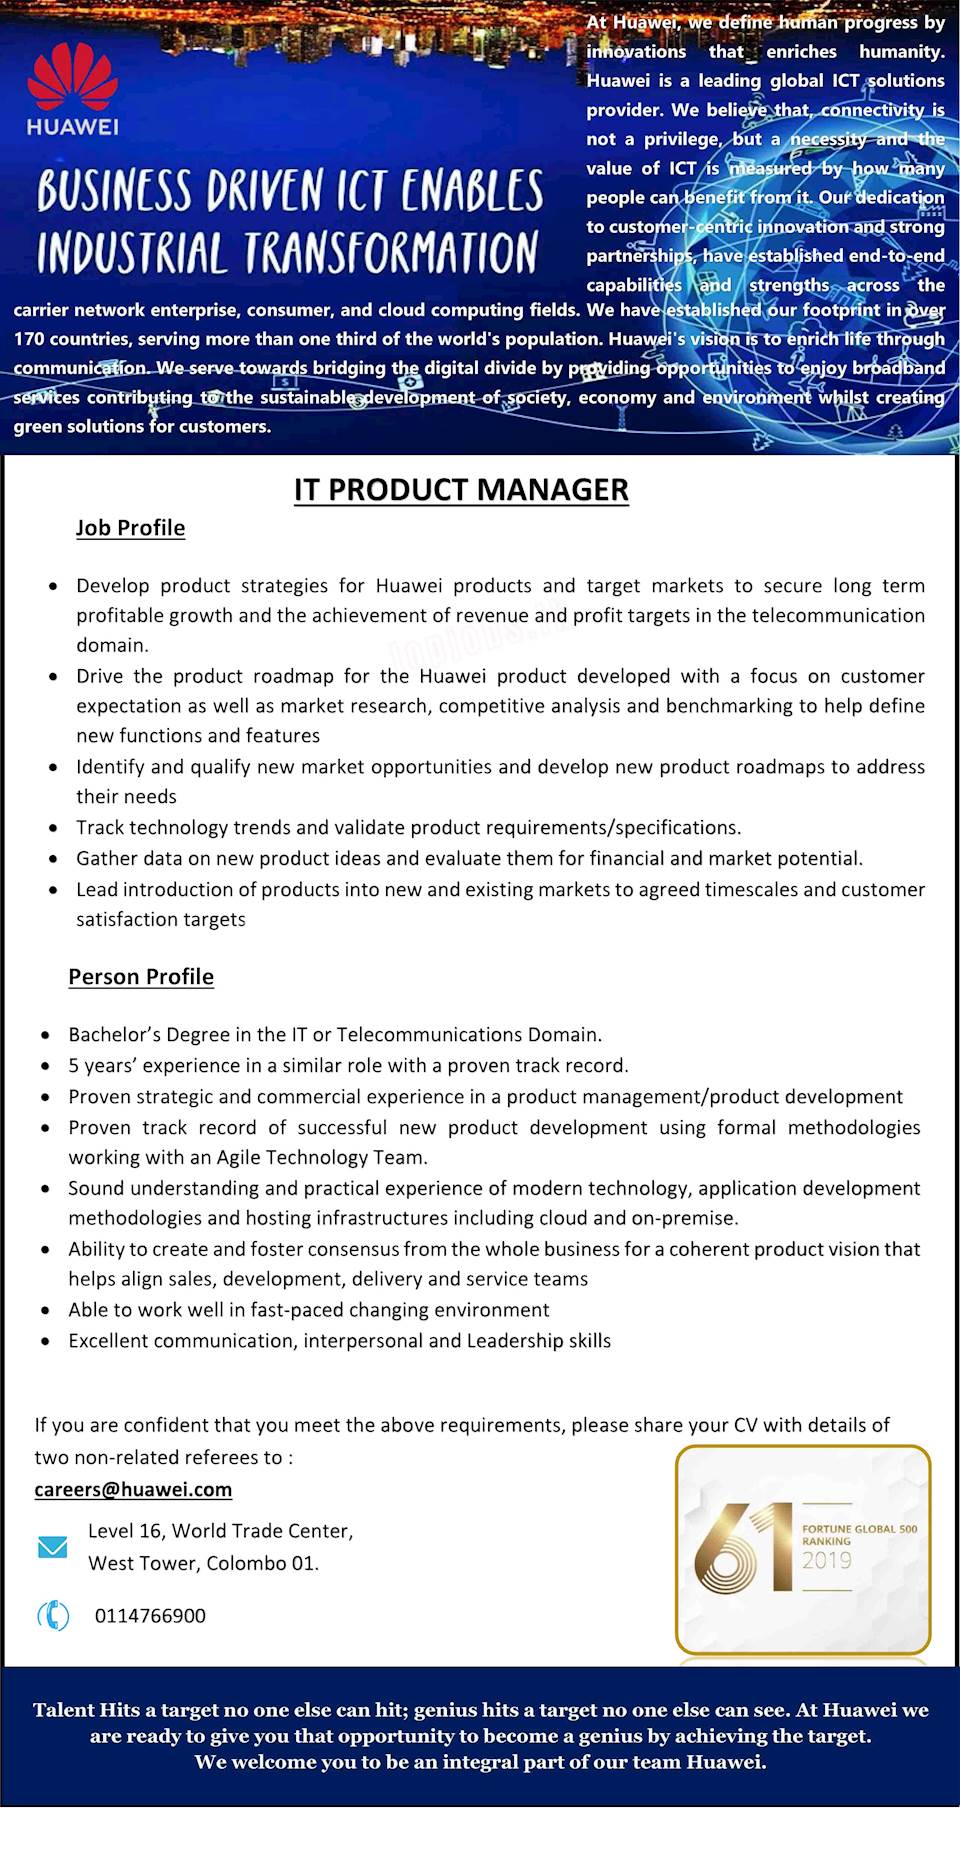 IT Product Manager